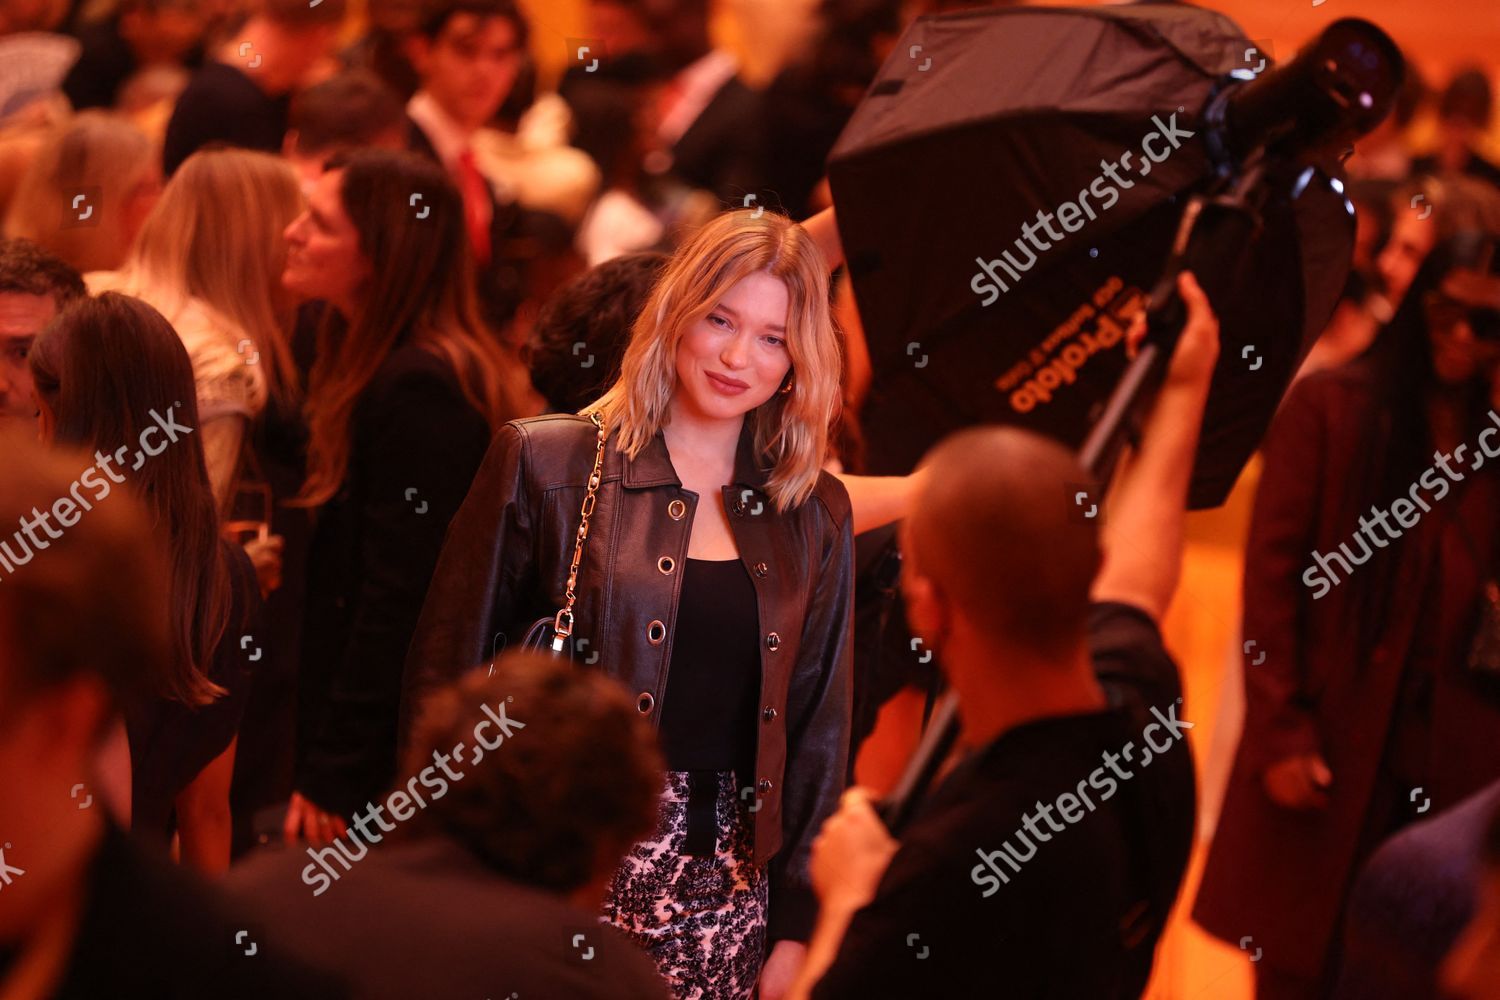 Lea Seydoux Is the New Face of Louis Vuitton